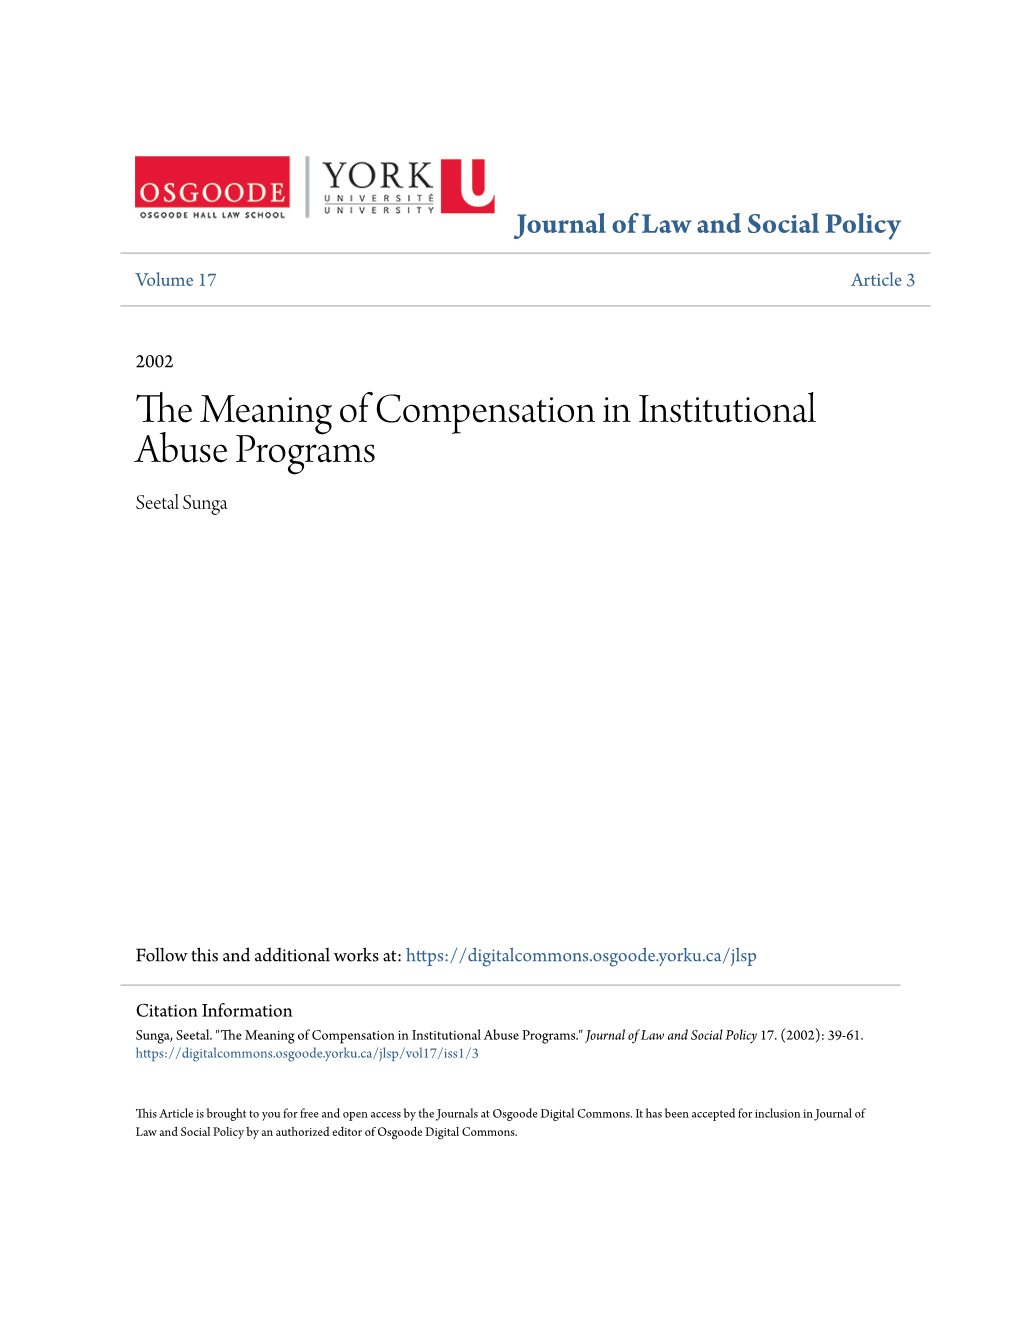 The Meaning of Compensation in Institutional Abuse Programs